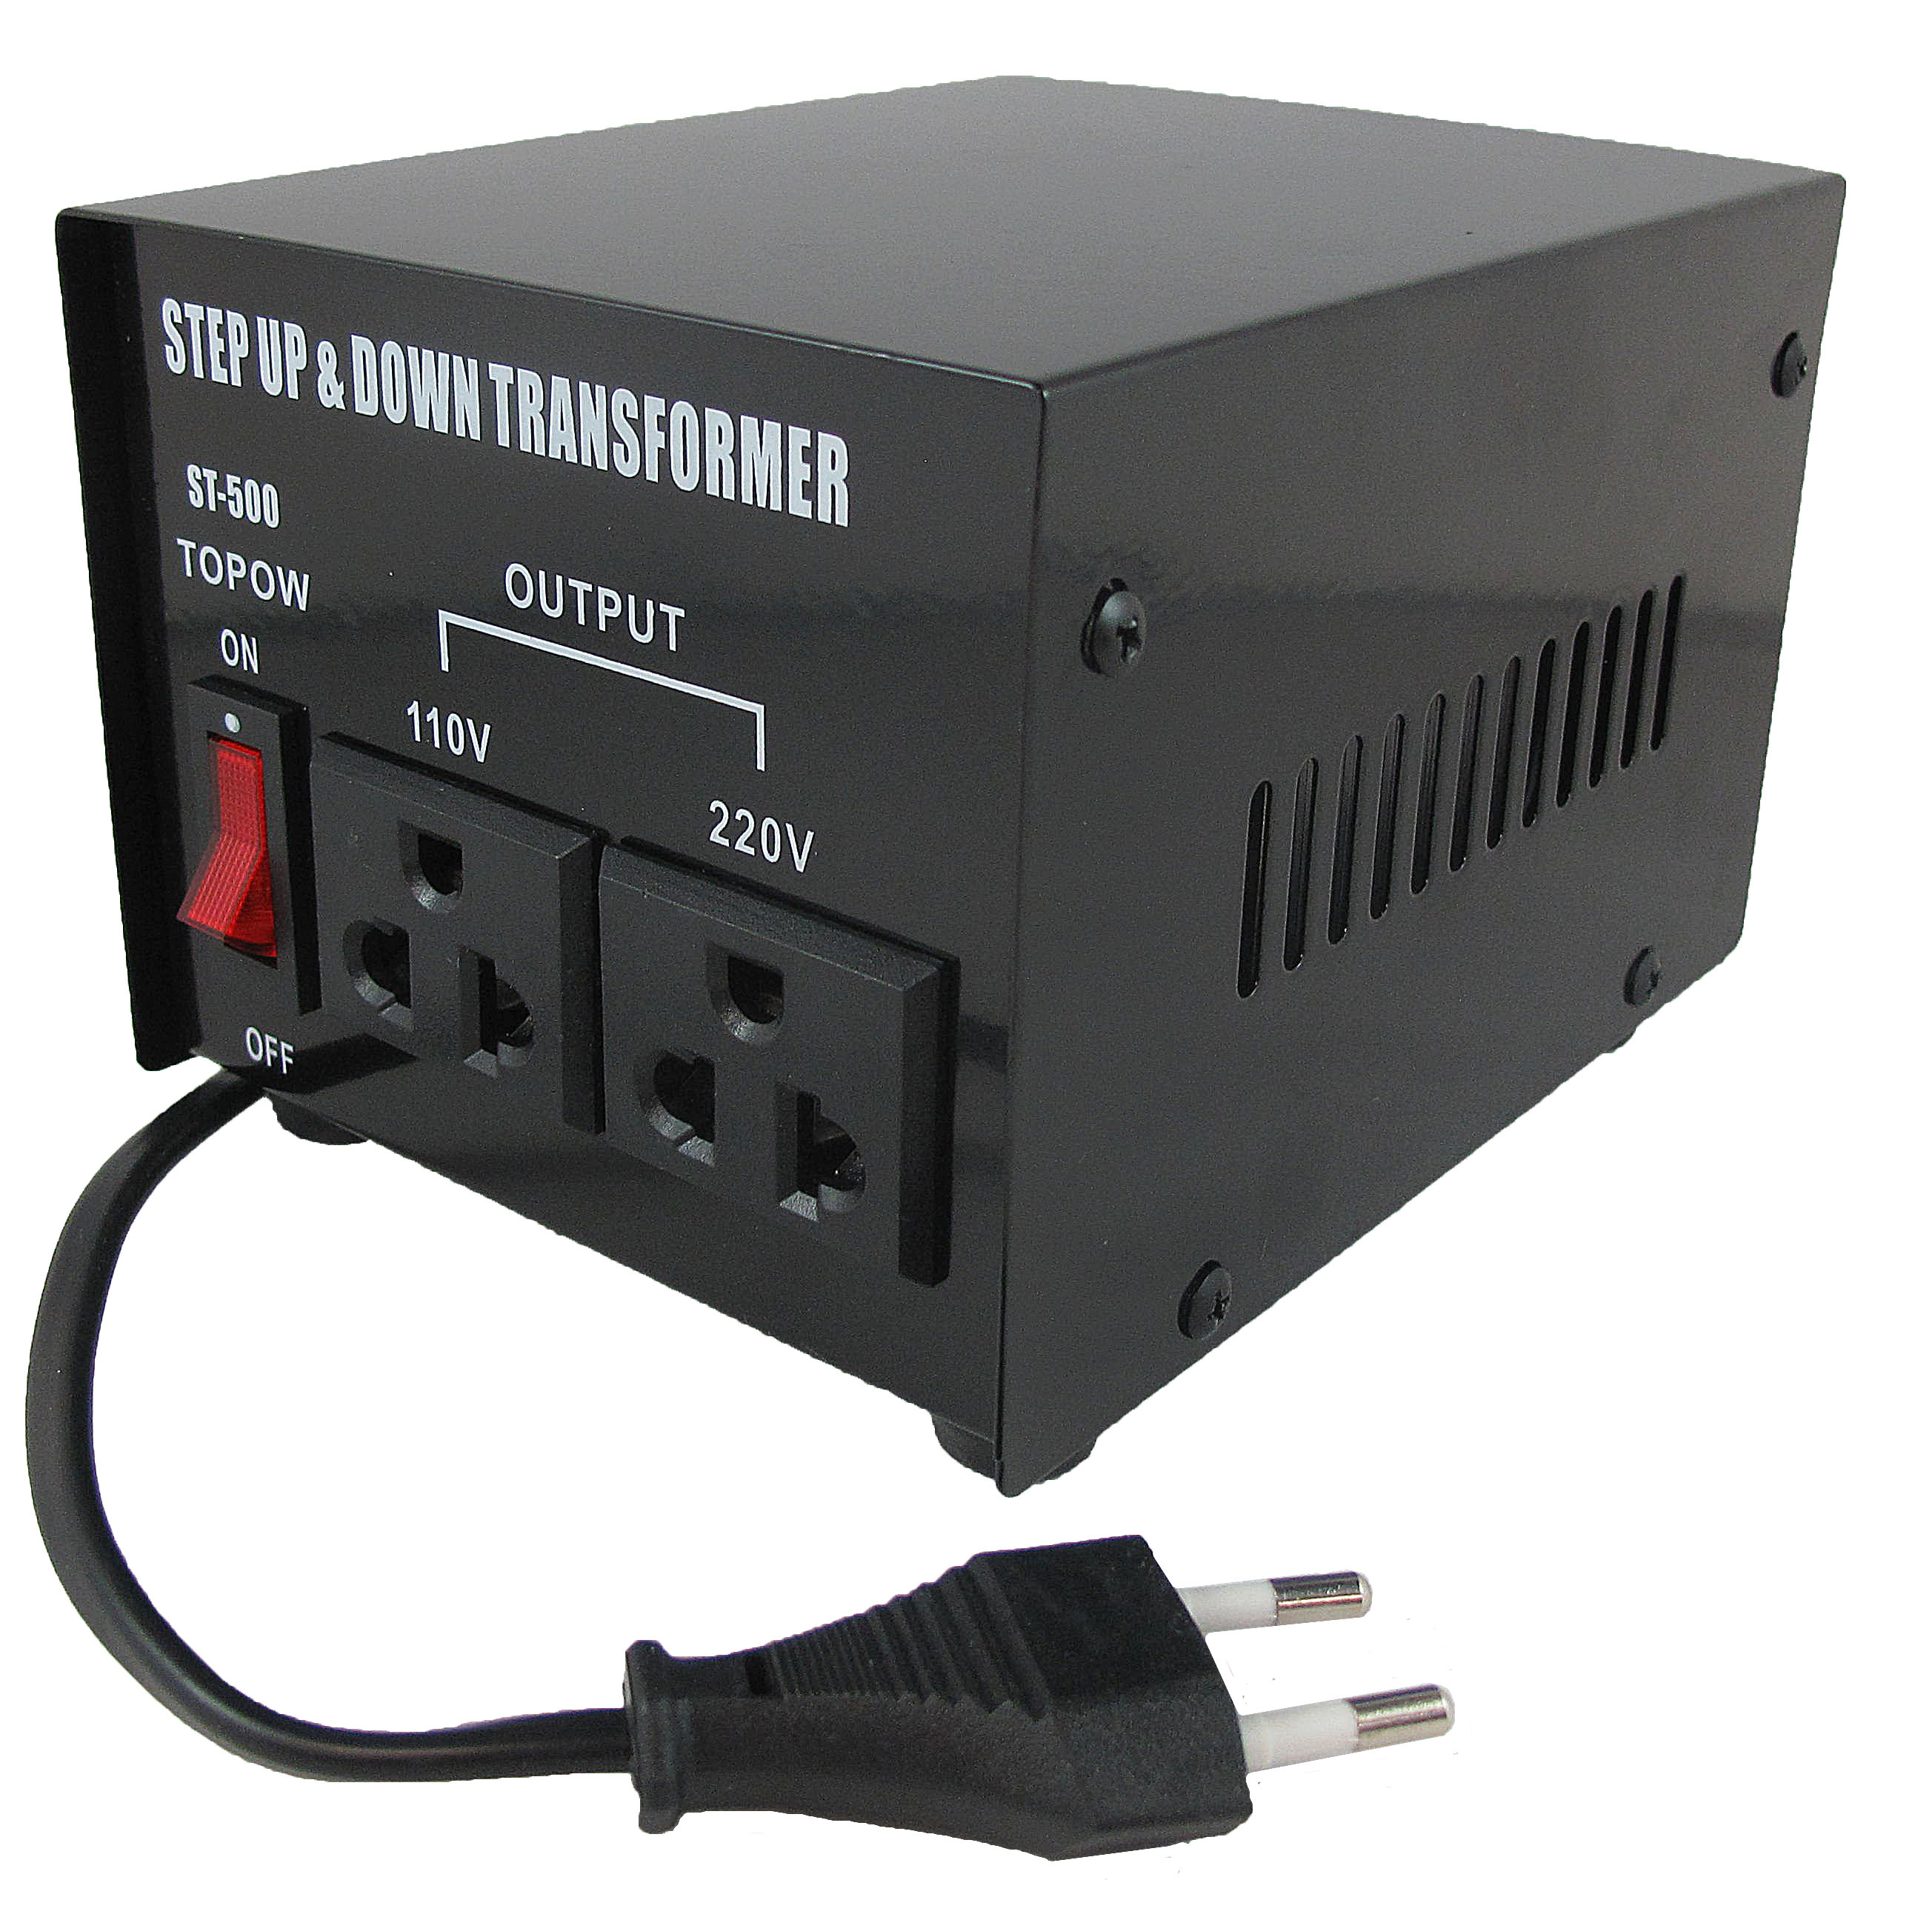 A voltage converter is an electric power converter